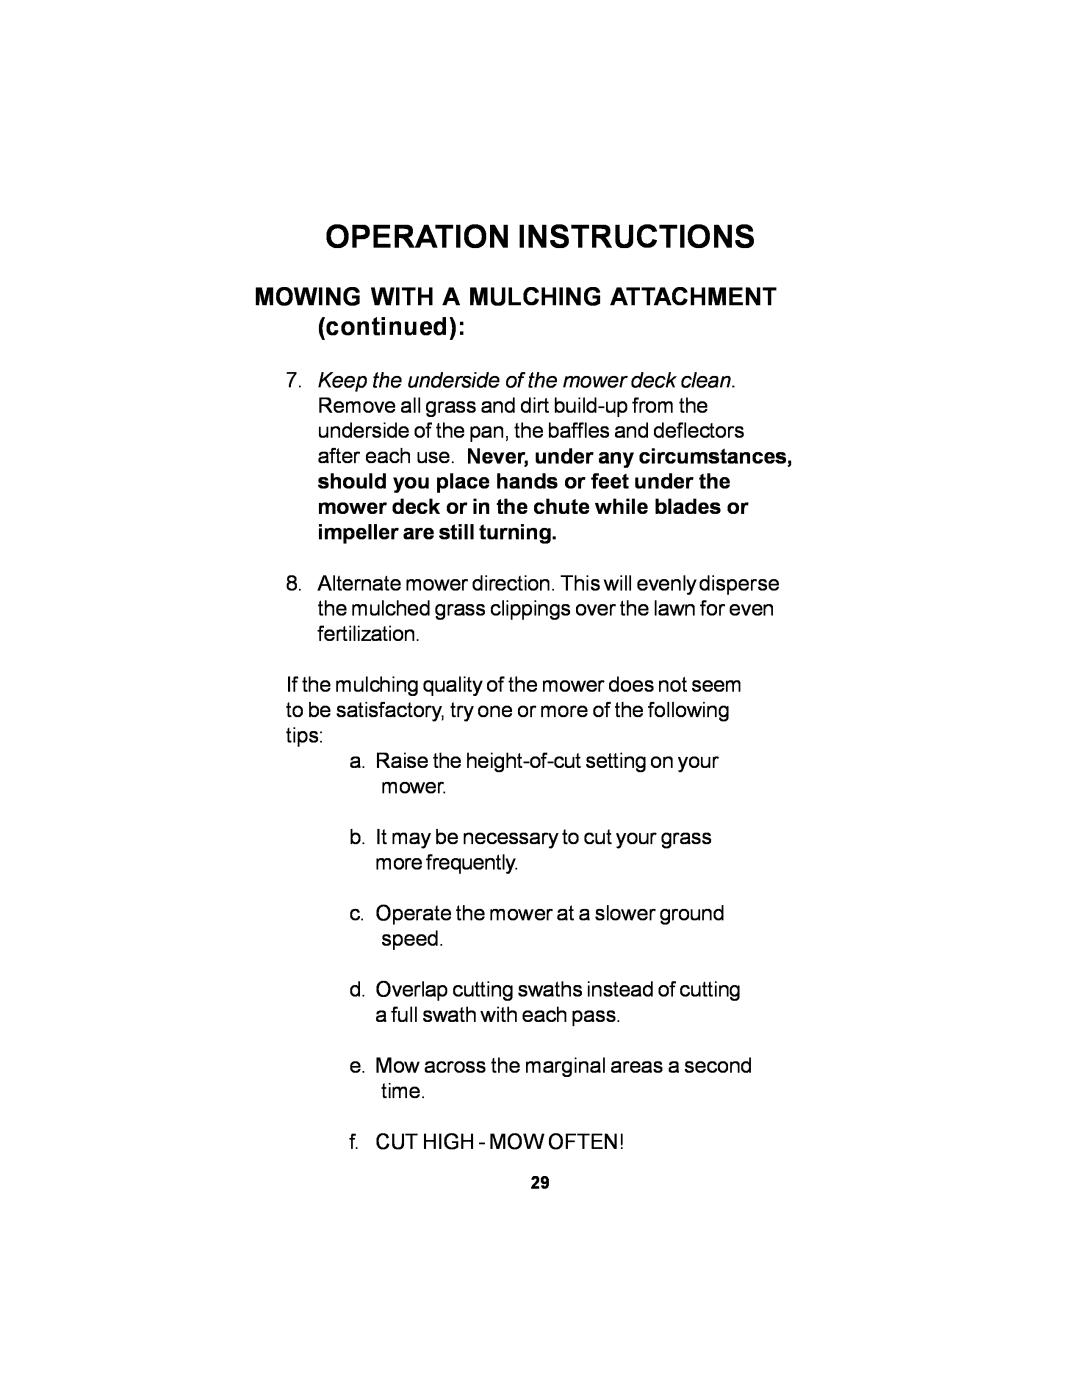 Dixon 36 manual MOWING WITH A MULCHING ATTACHMENT continued, Operation Instructions 